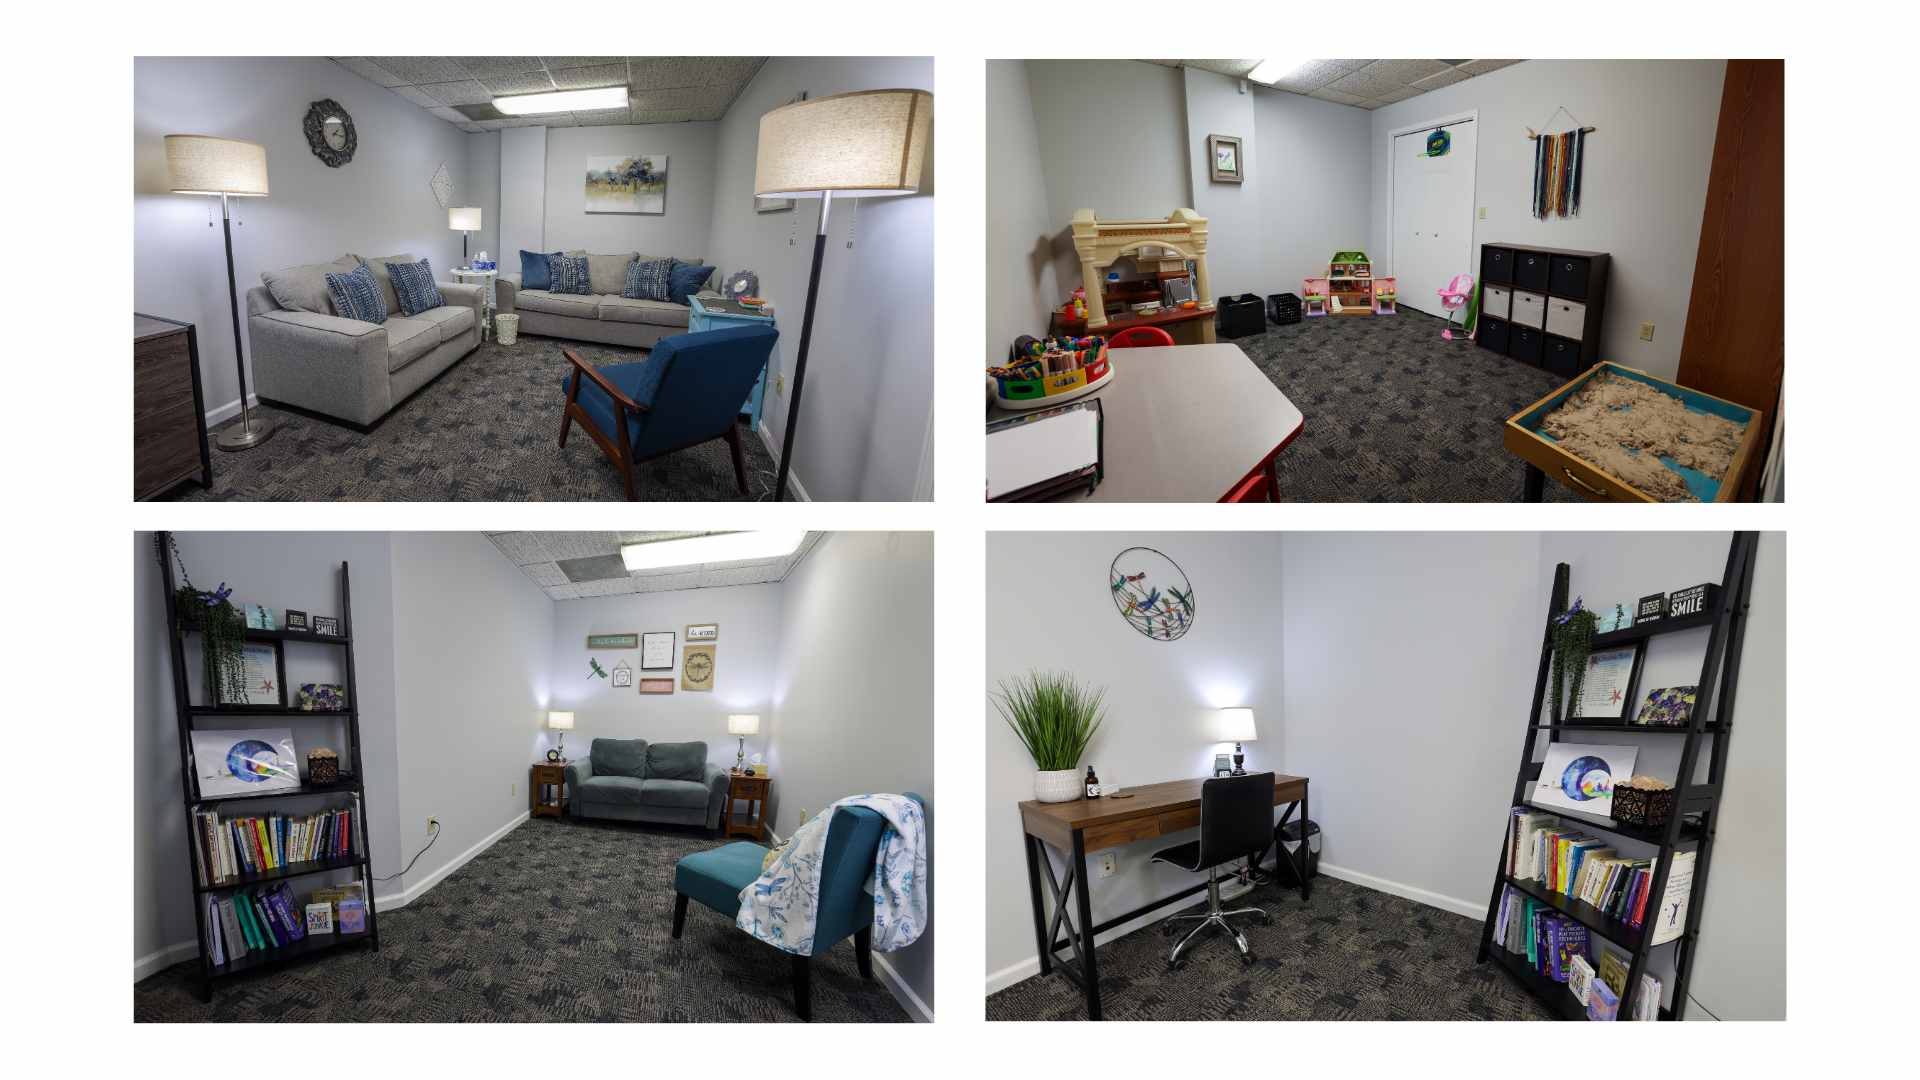 4 photos of different office spaces at Clarity Counseling